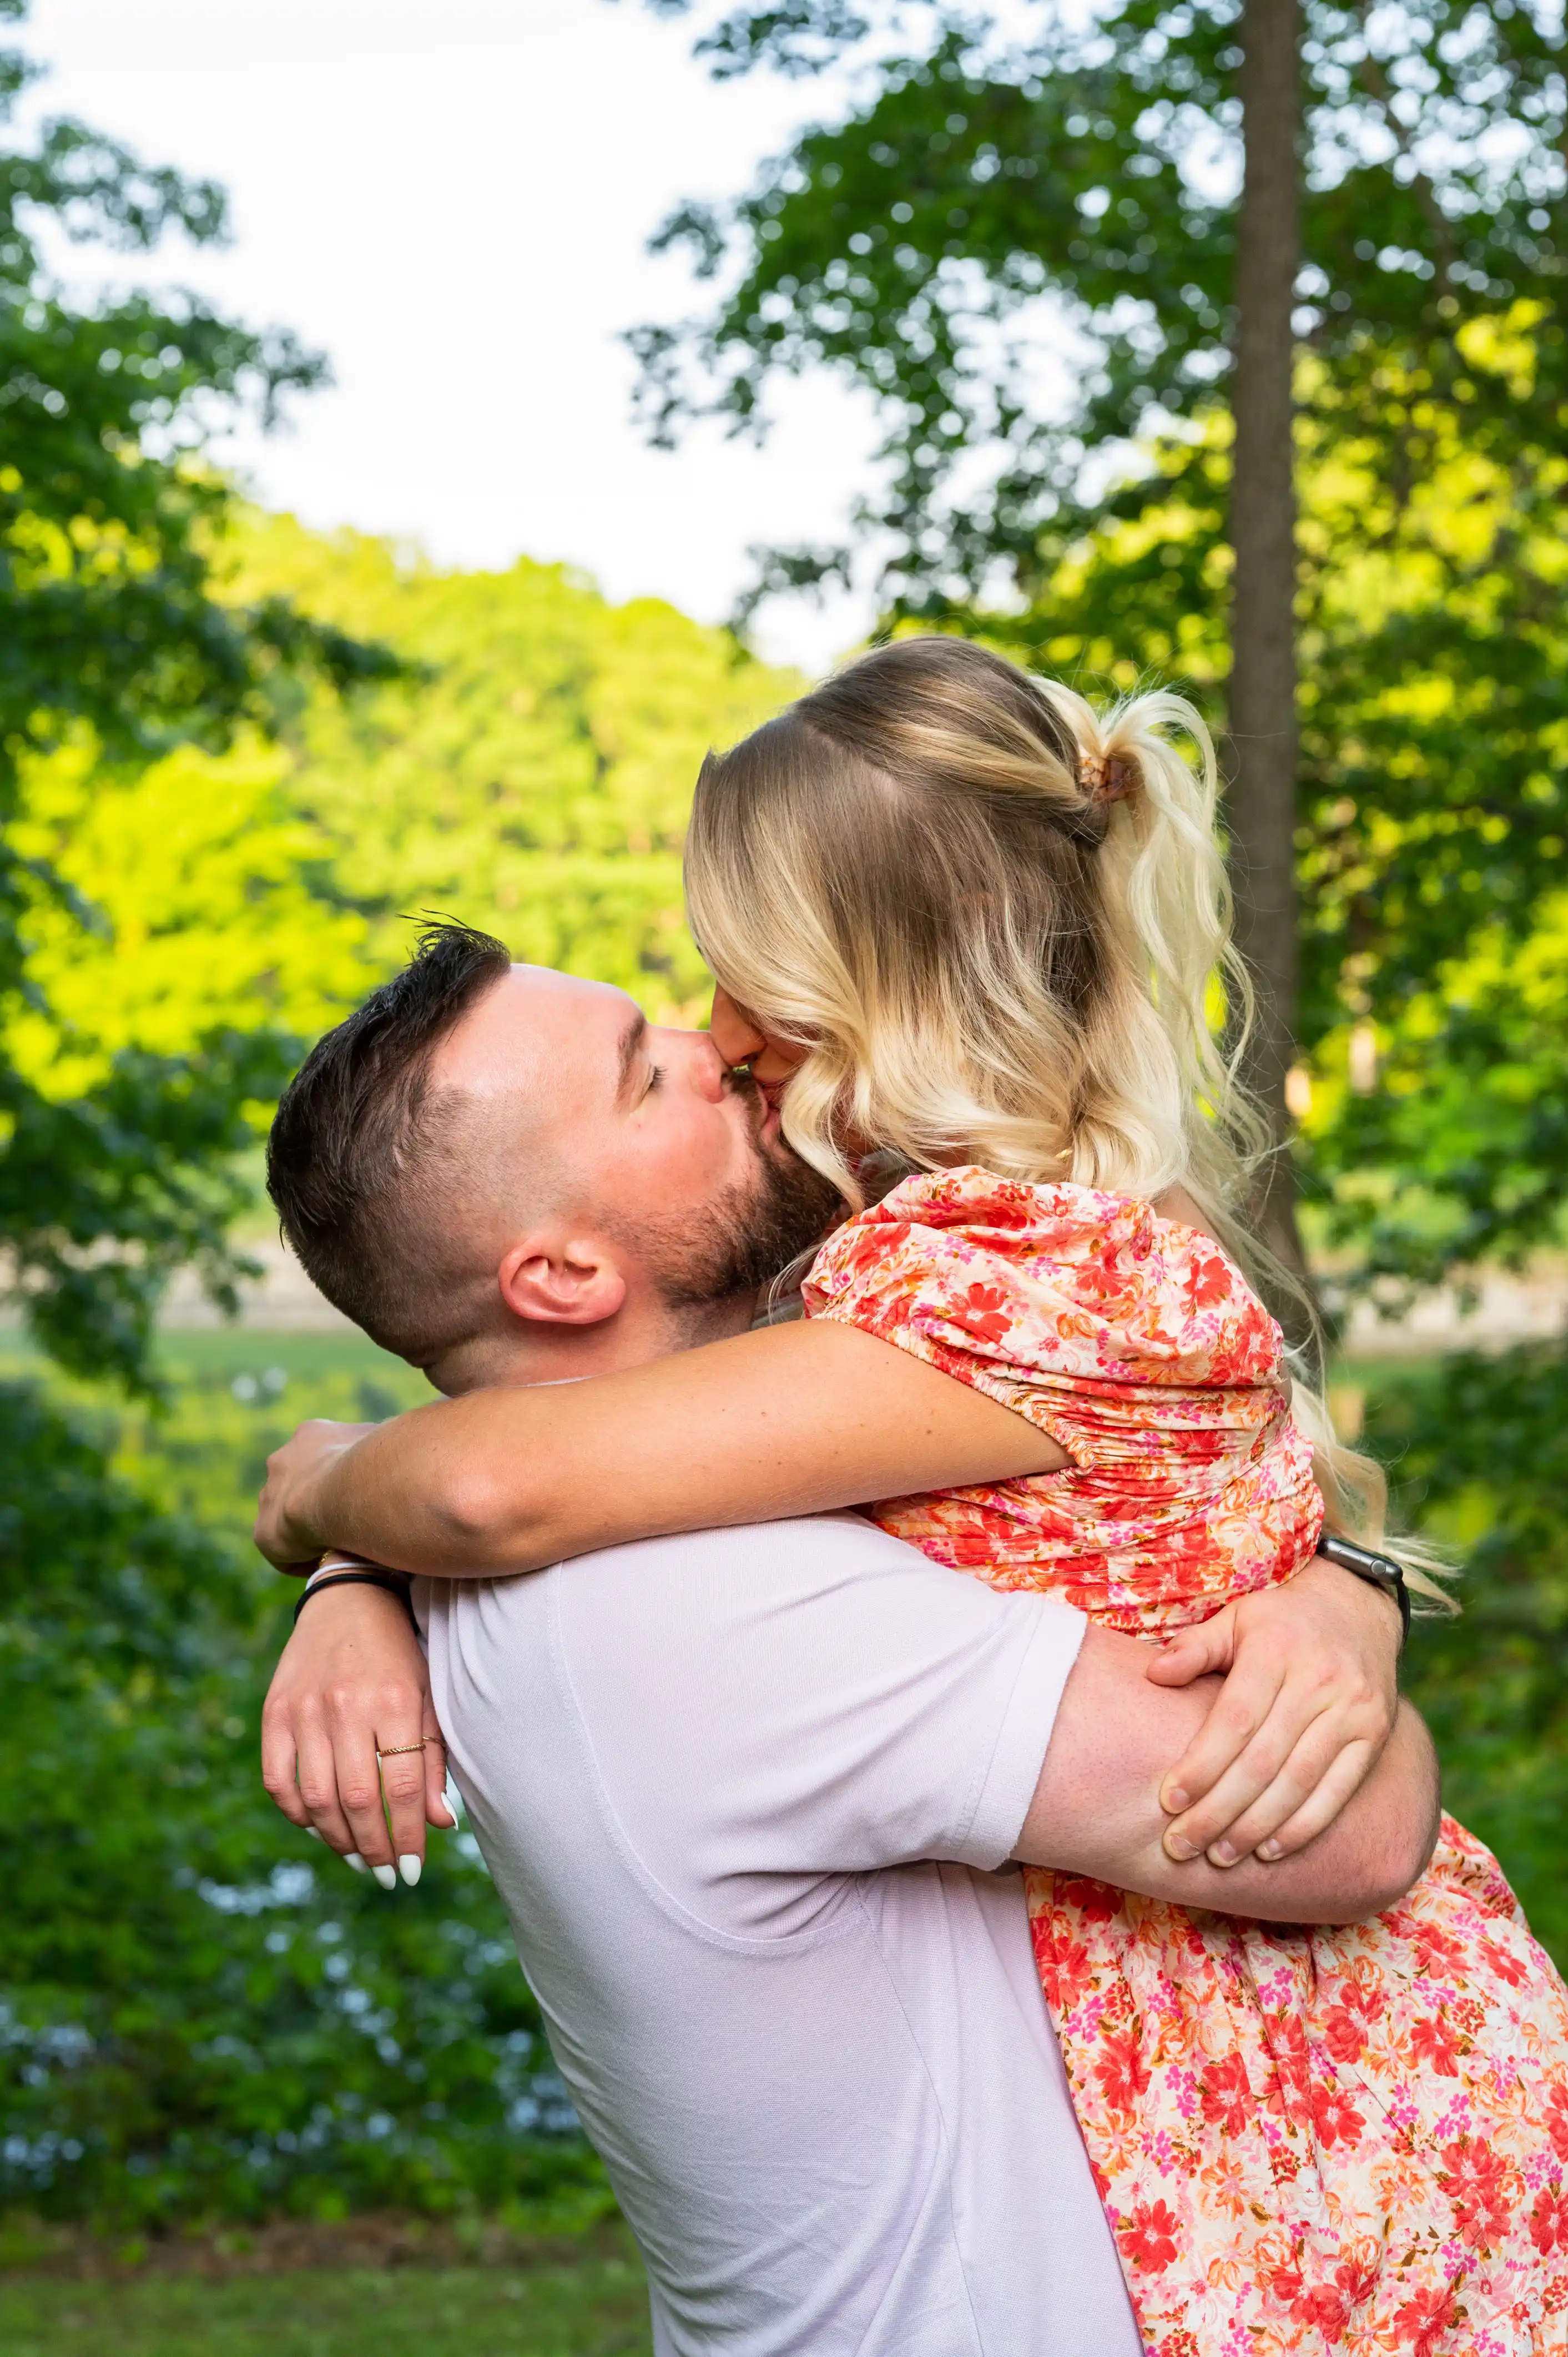 Father embracing young daughter with affection outdoors with greenery in the background.